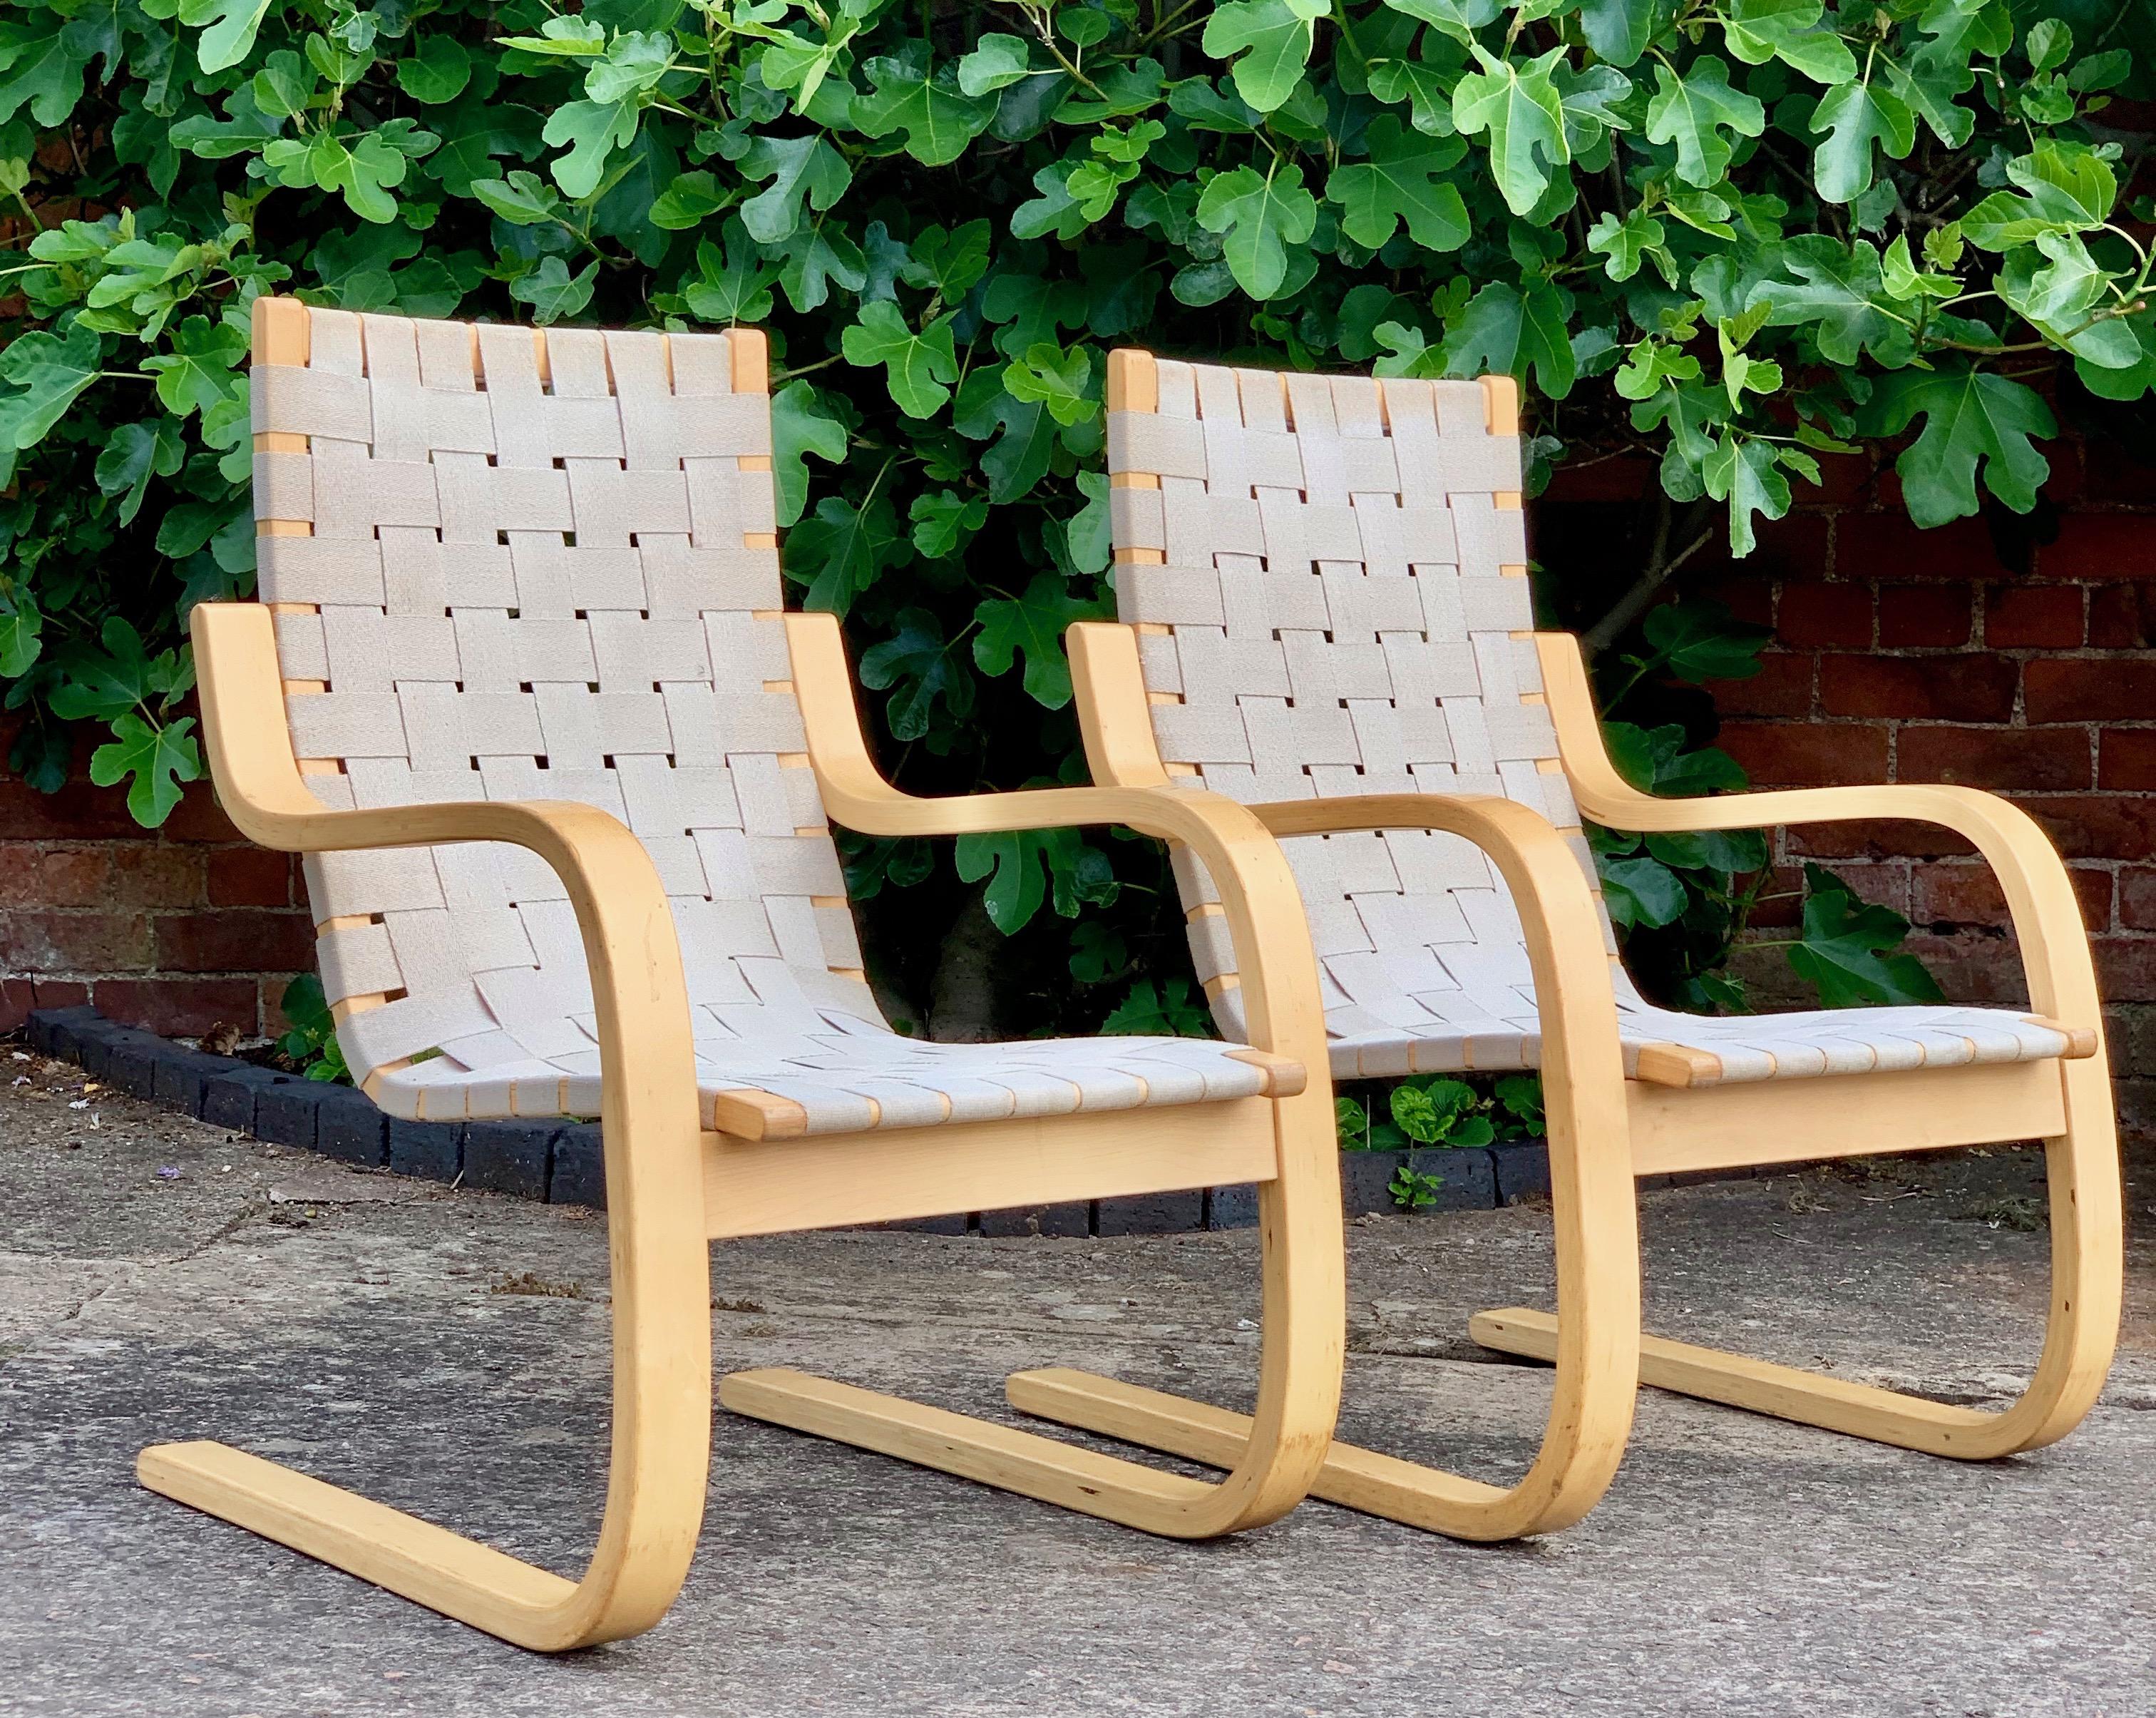 Alvar Aalto armchair model 406 pair of cantilever chairs by Artek, circa 1970s

Magnificent early Alvar Aalto model 406 Cantilever lounge chairs by Artek circa 1970s, natural bentwood laminated Birch frames with woven canvas strapped